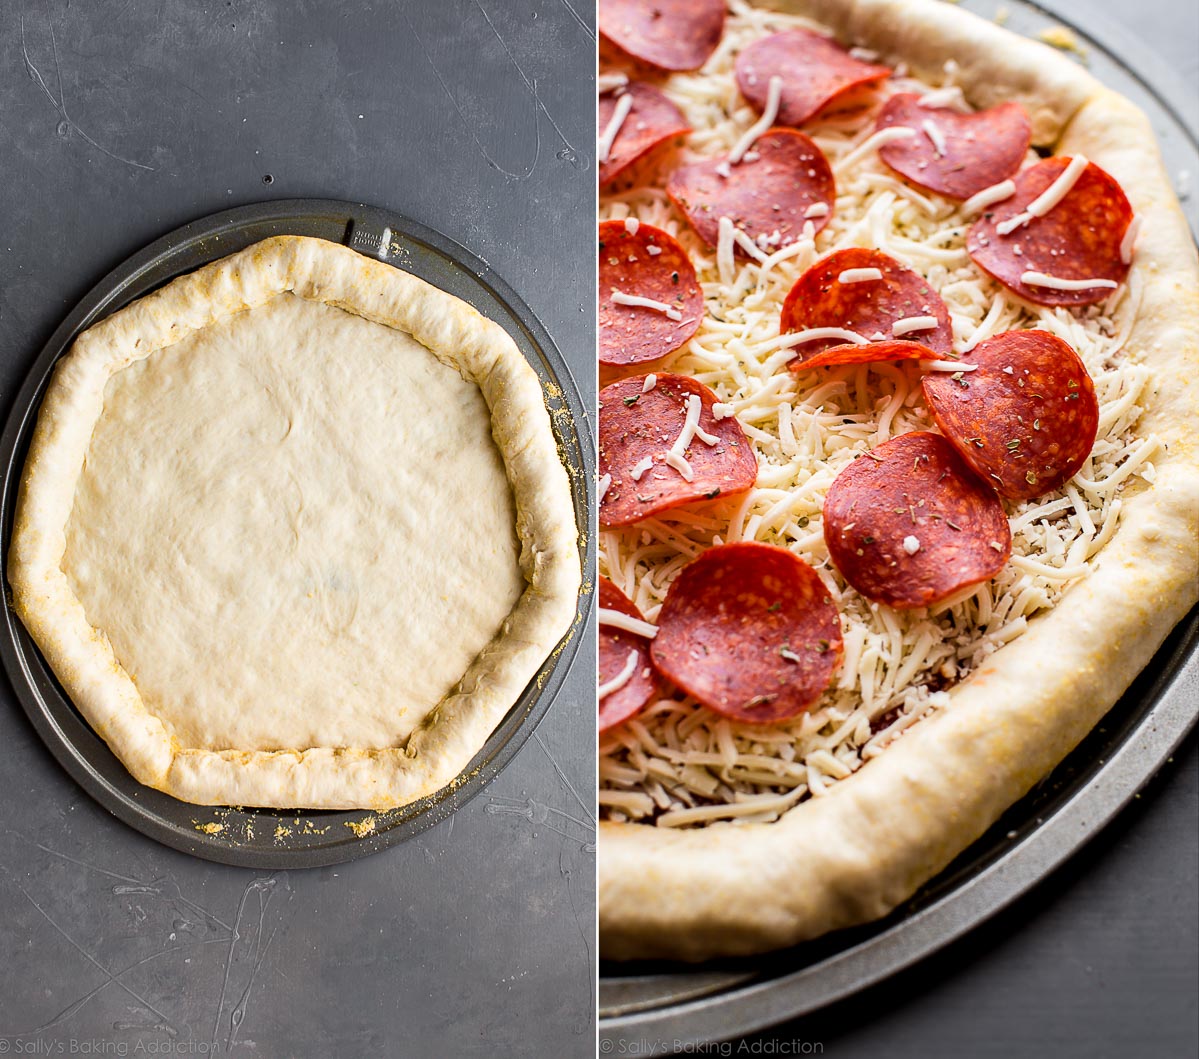 2 images of pizza dough with a stuffed crust and stuffed crust pizza dough topped with sauce, cheese, and pepperoni on a pizza pan